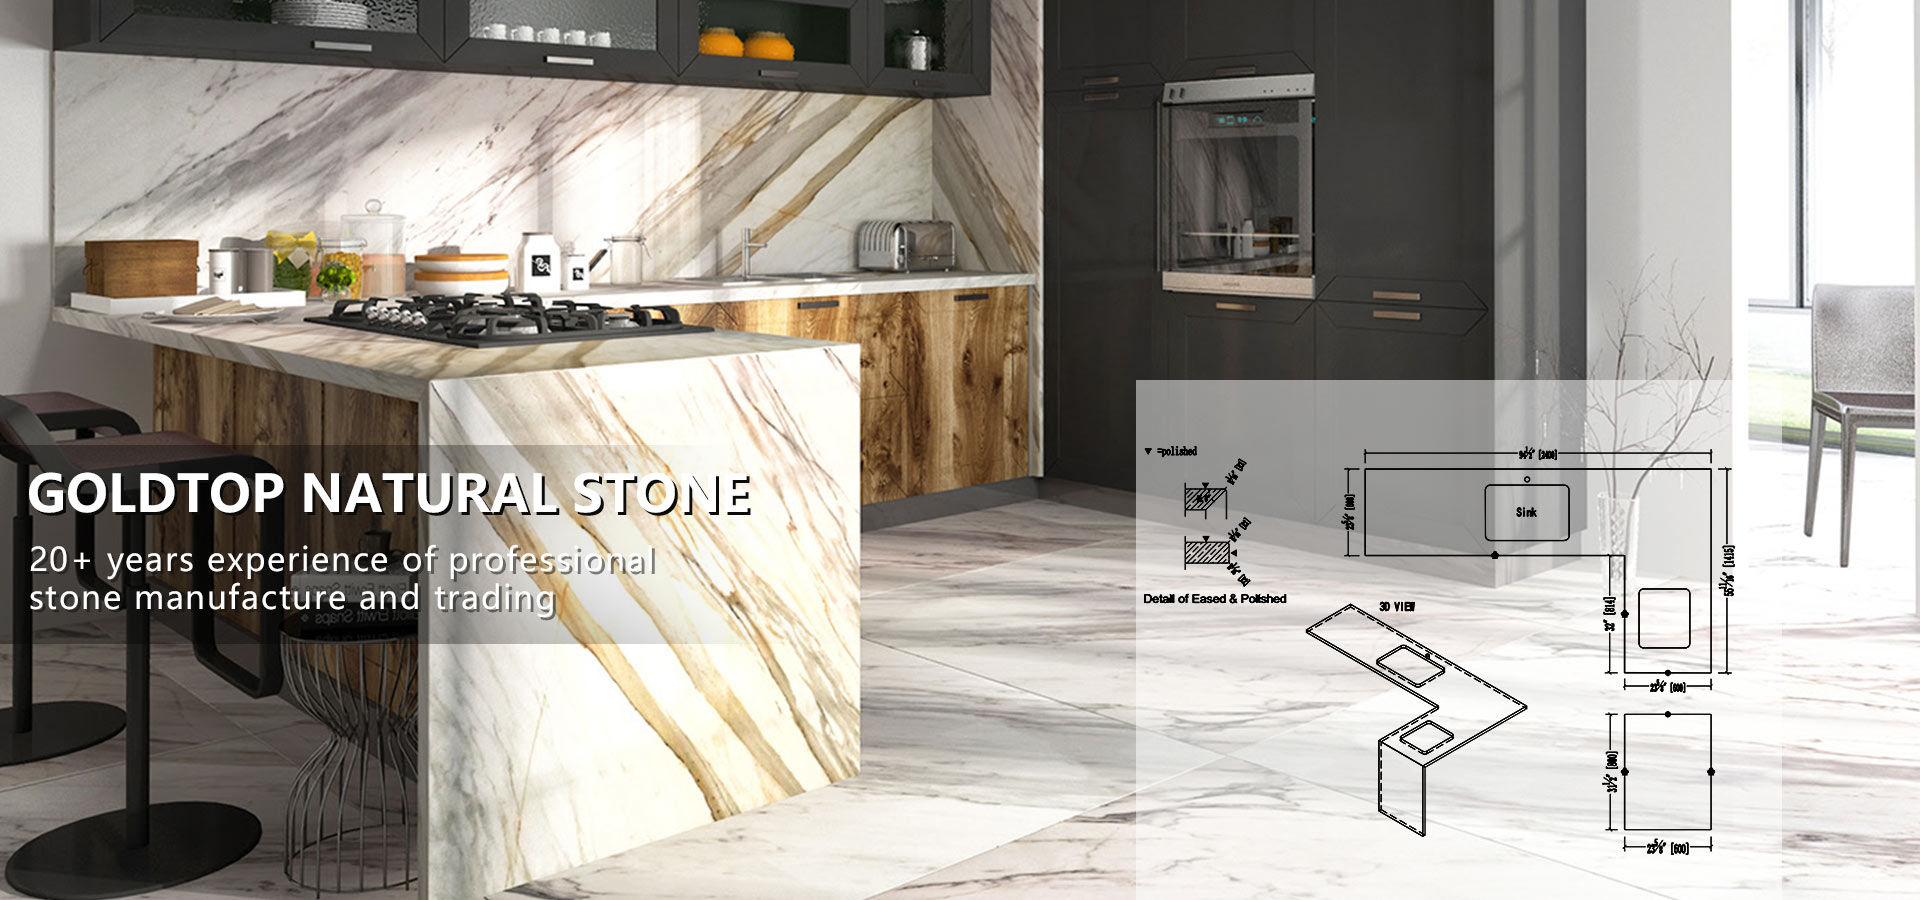 20+ years experience of professional stone manufacture and trading